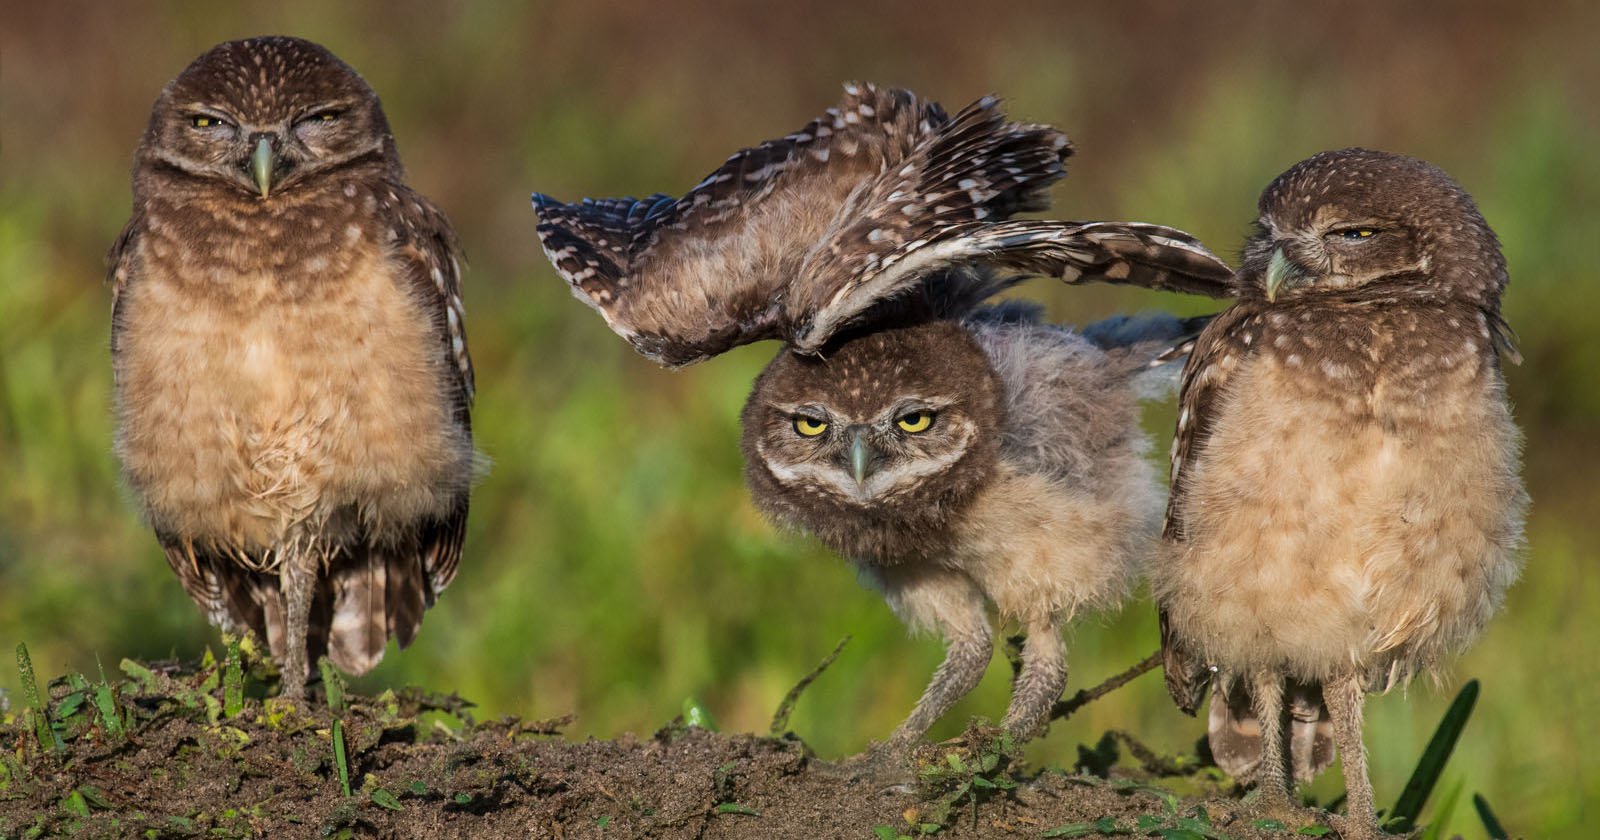 Photos of Floridas Fight to Protect Threatened Burrowing Owls